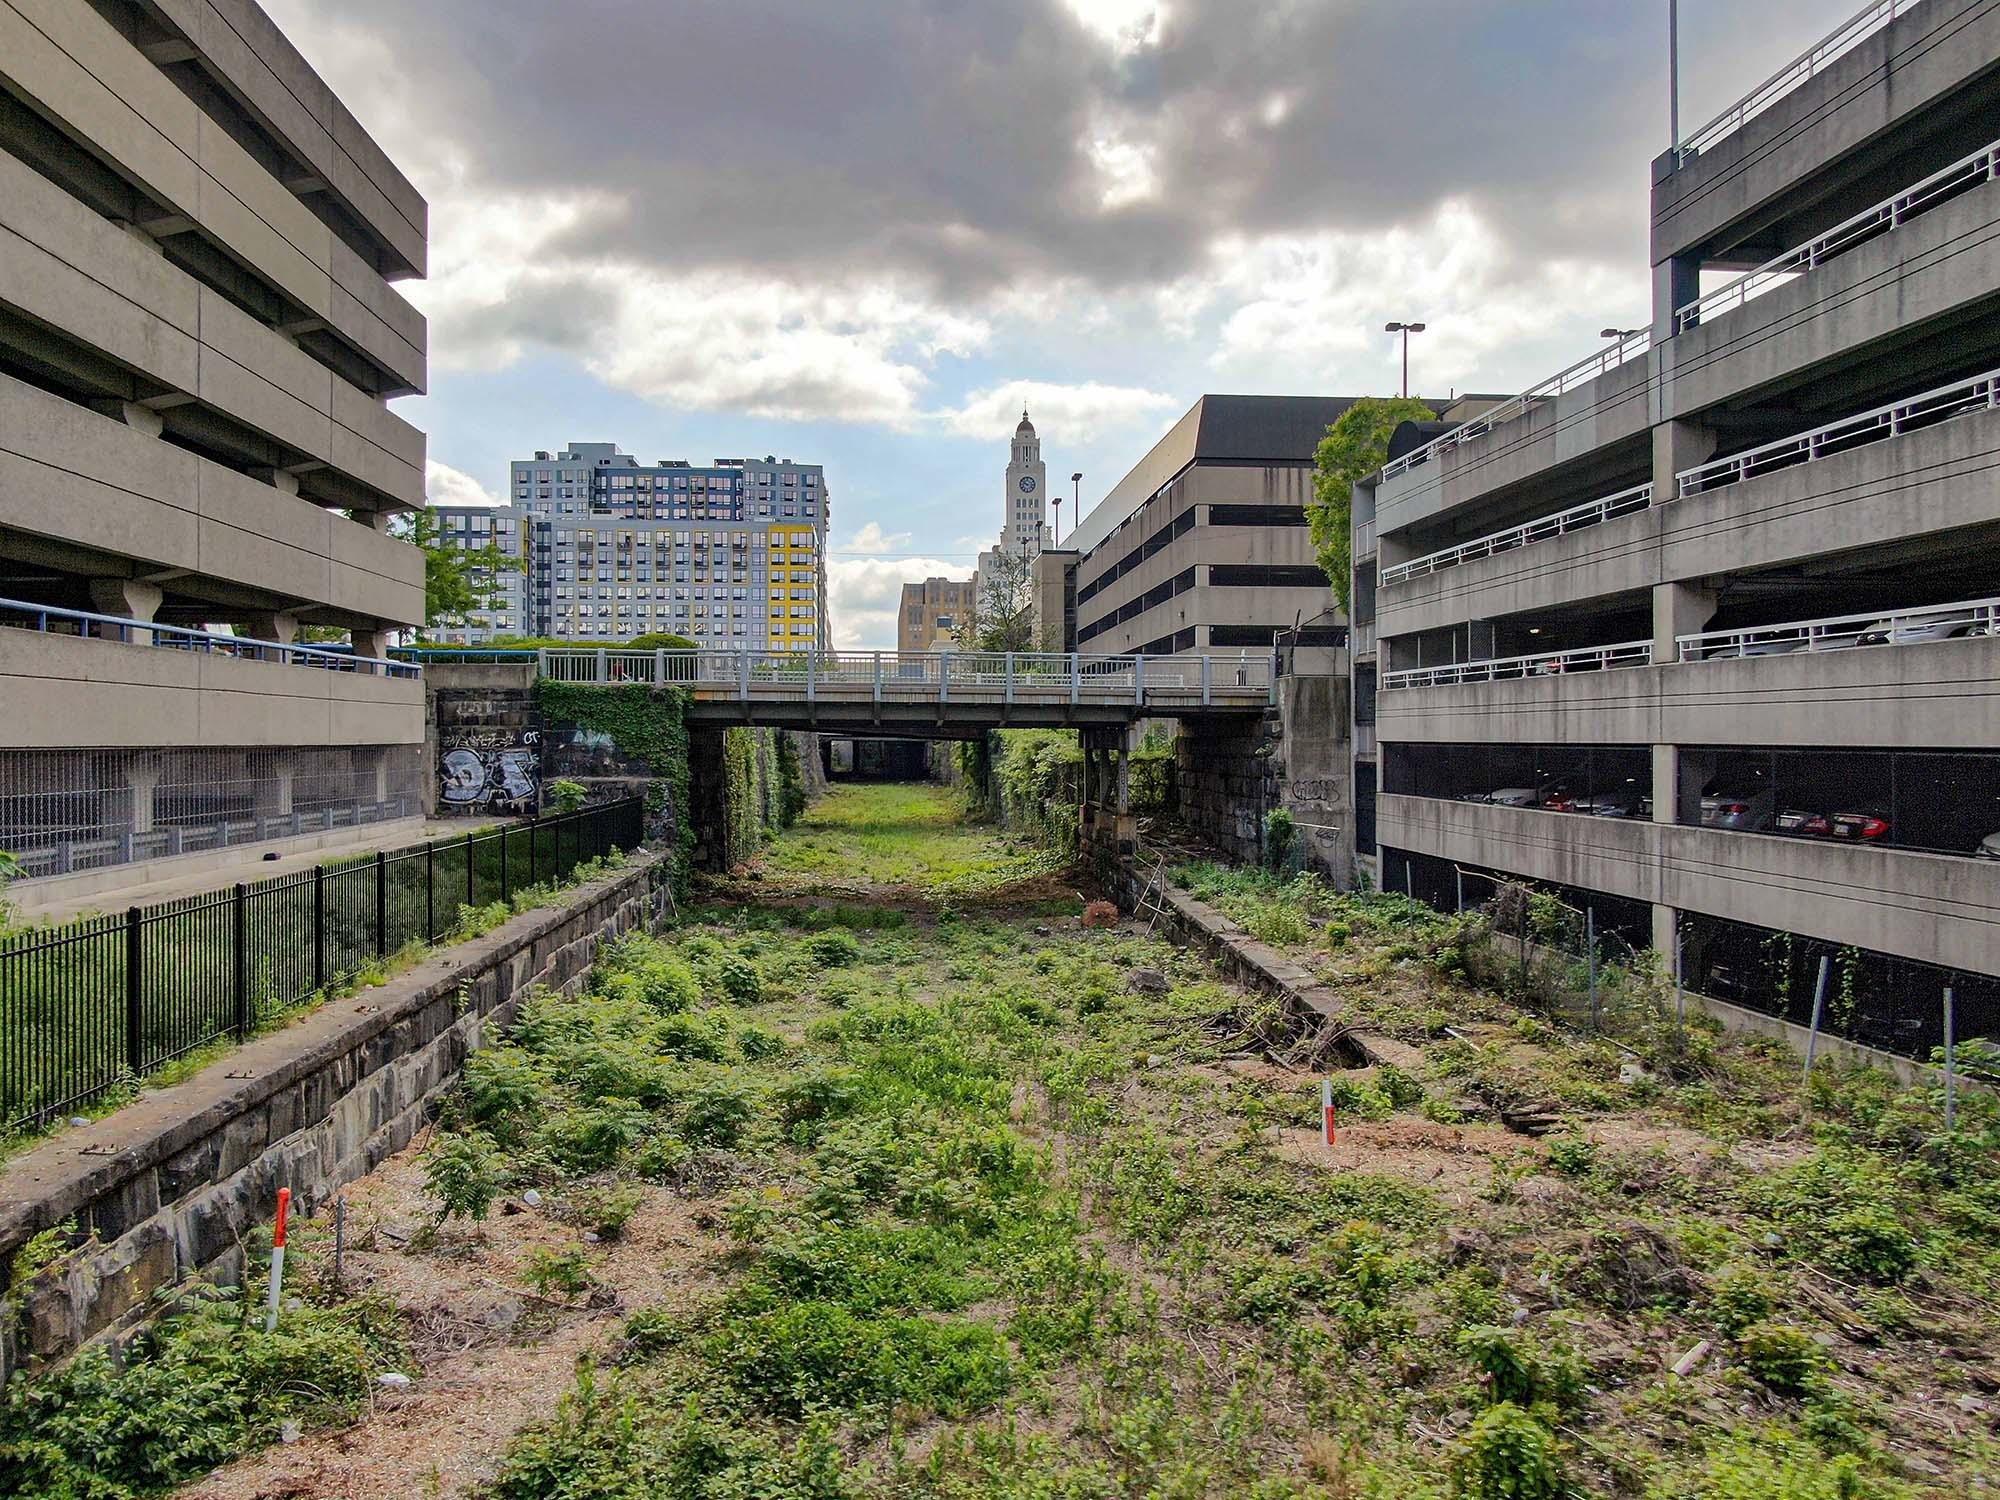 Picture of the Cut, overgrown rail road tracks with buildings around.